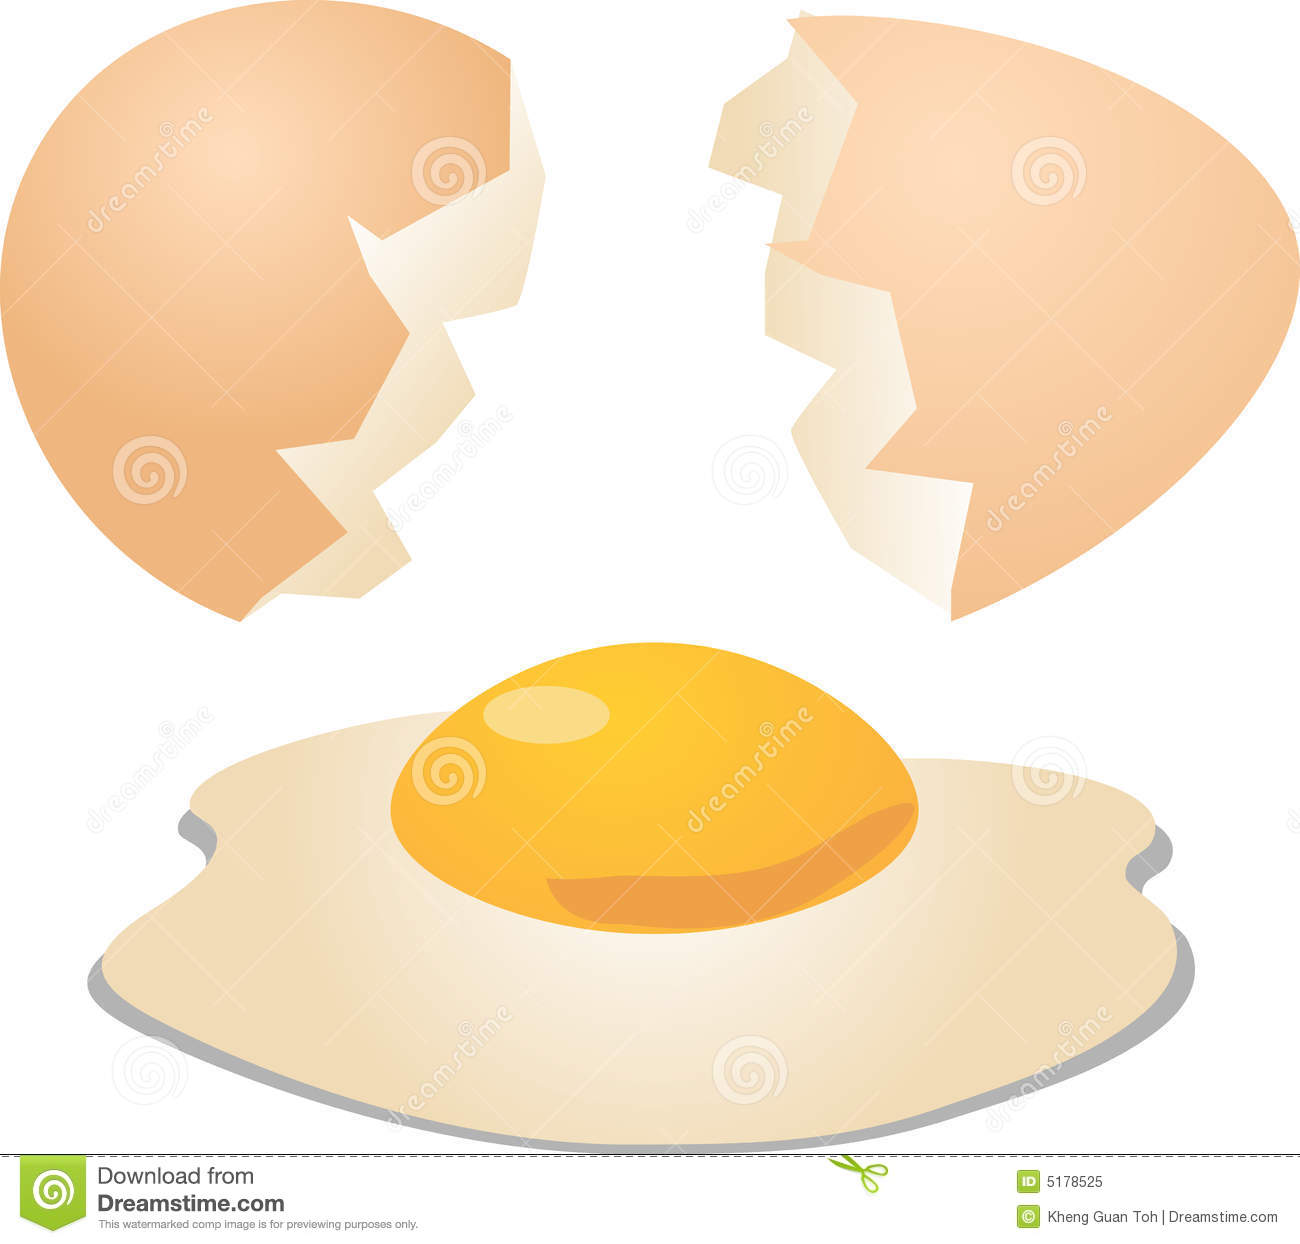 Clipart Cracked Egg Eggs Cracked Open Shell And